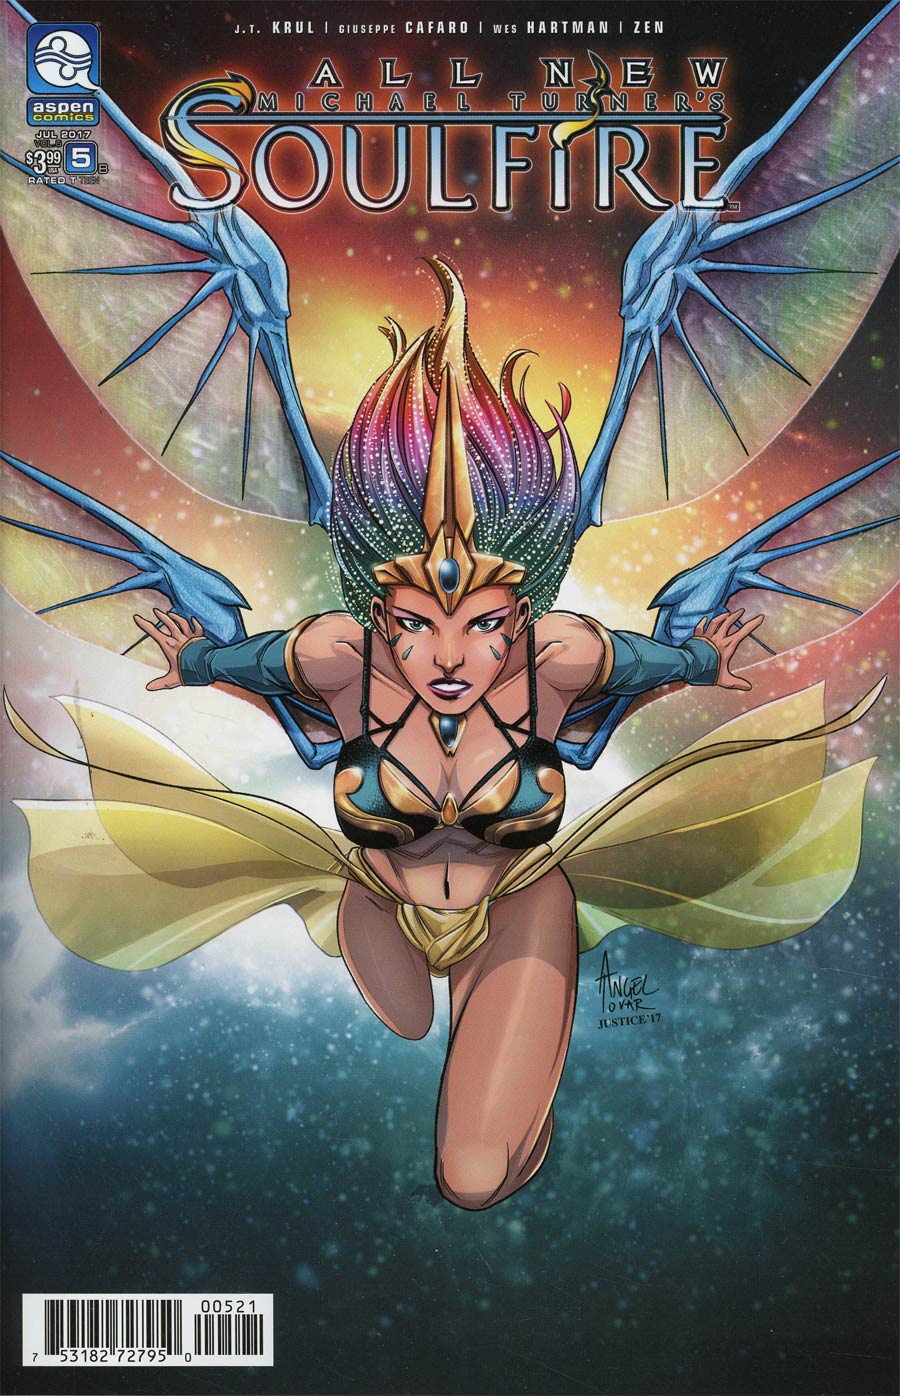 All New Soulfire Vol 2 #5 Cover B Variant Angel Tovar Cover